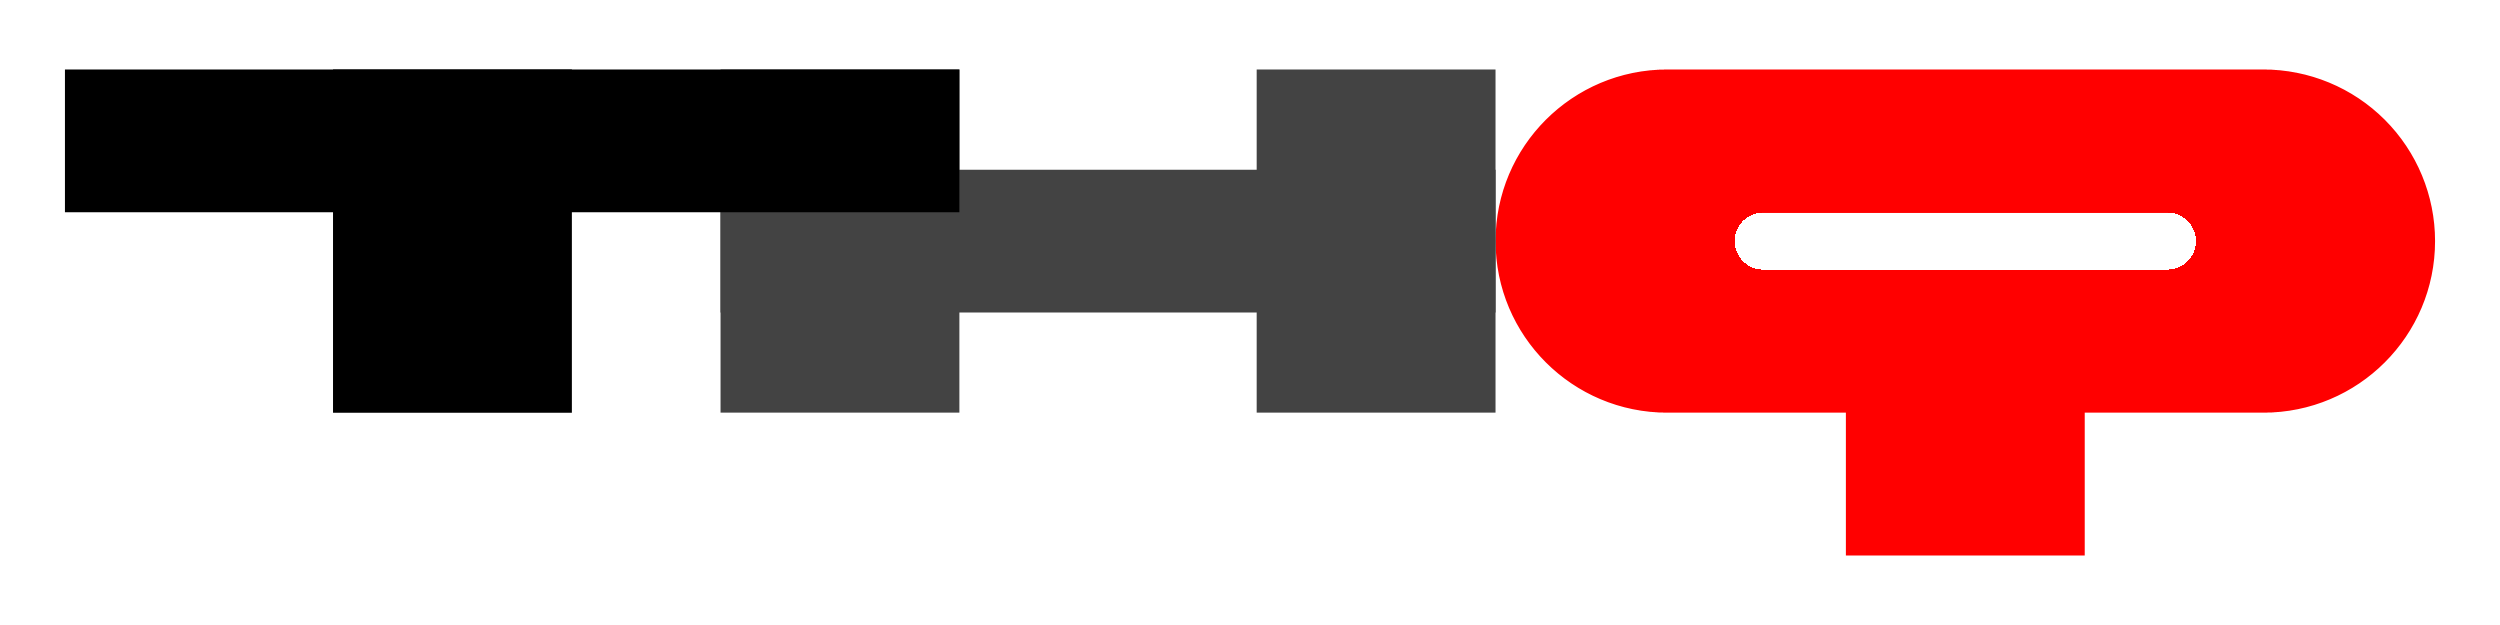 THQ logo redesign.png